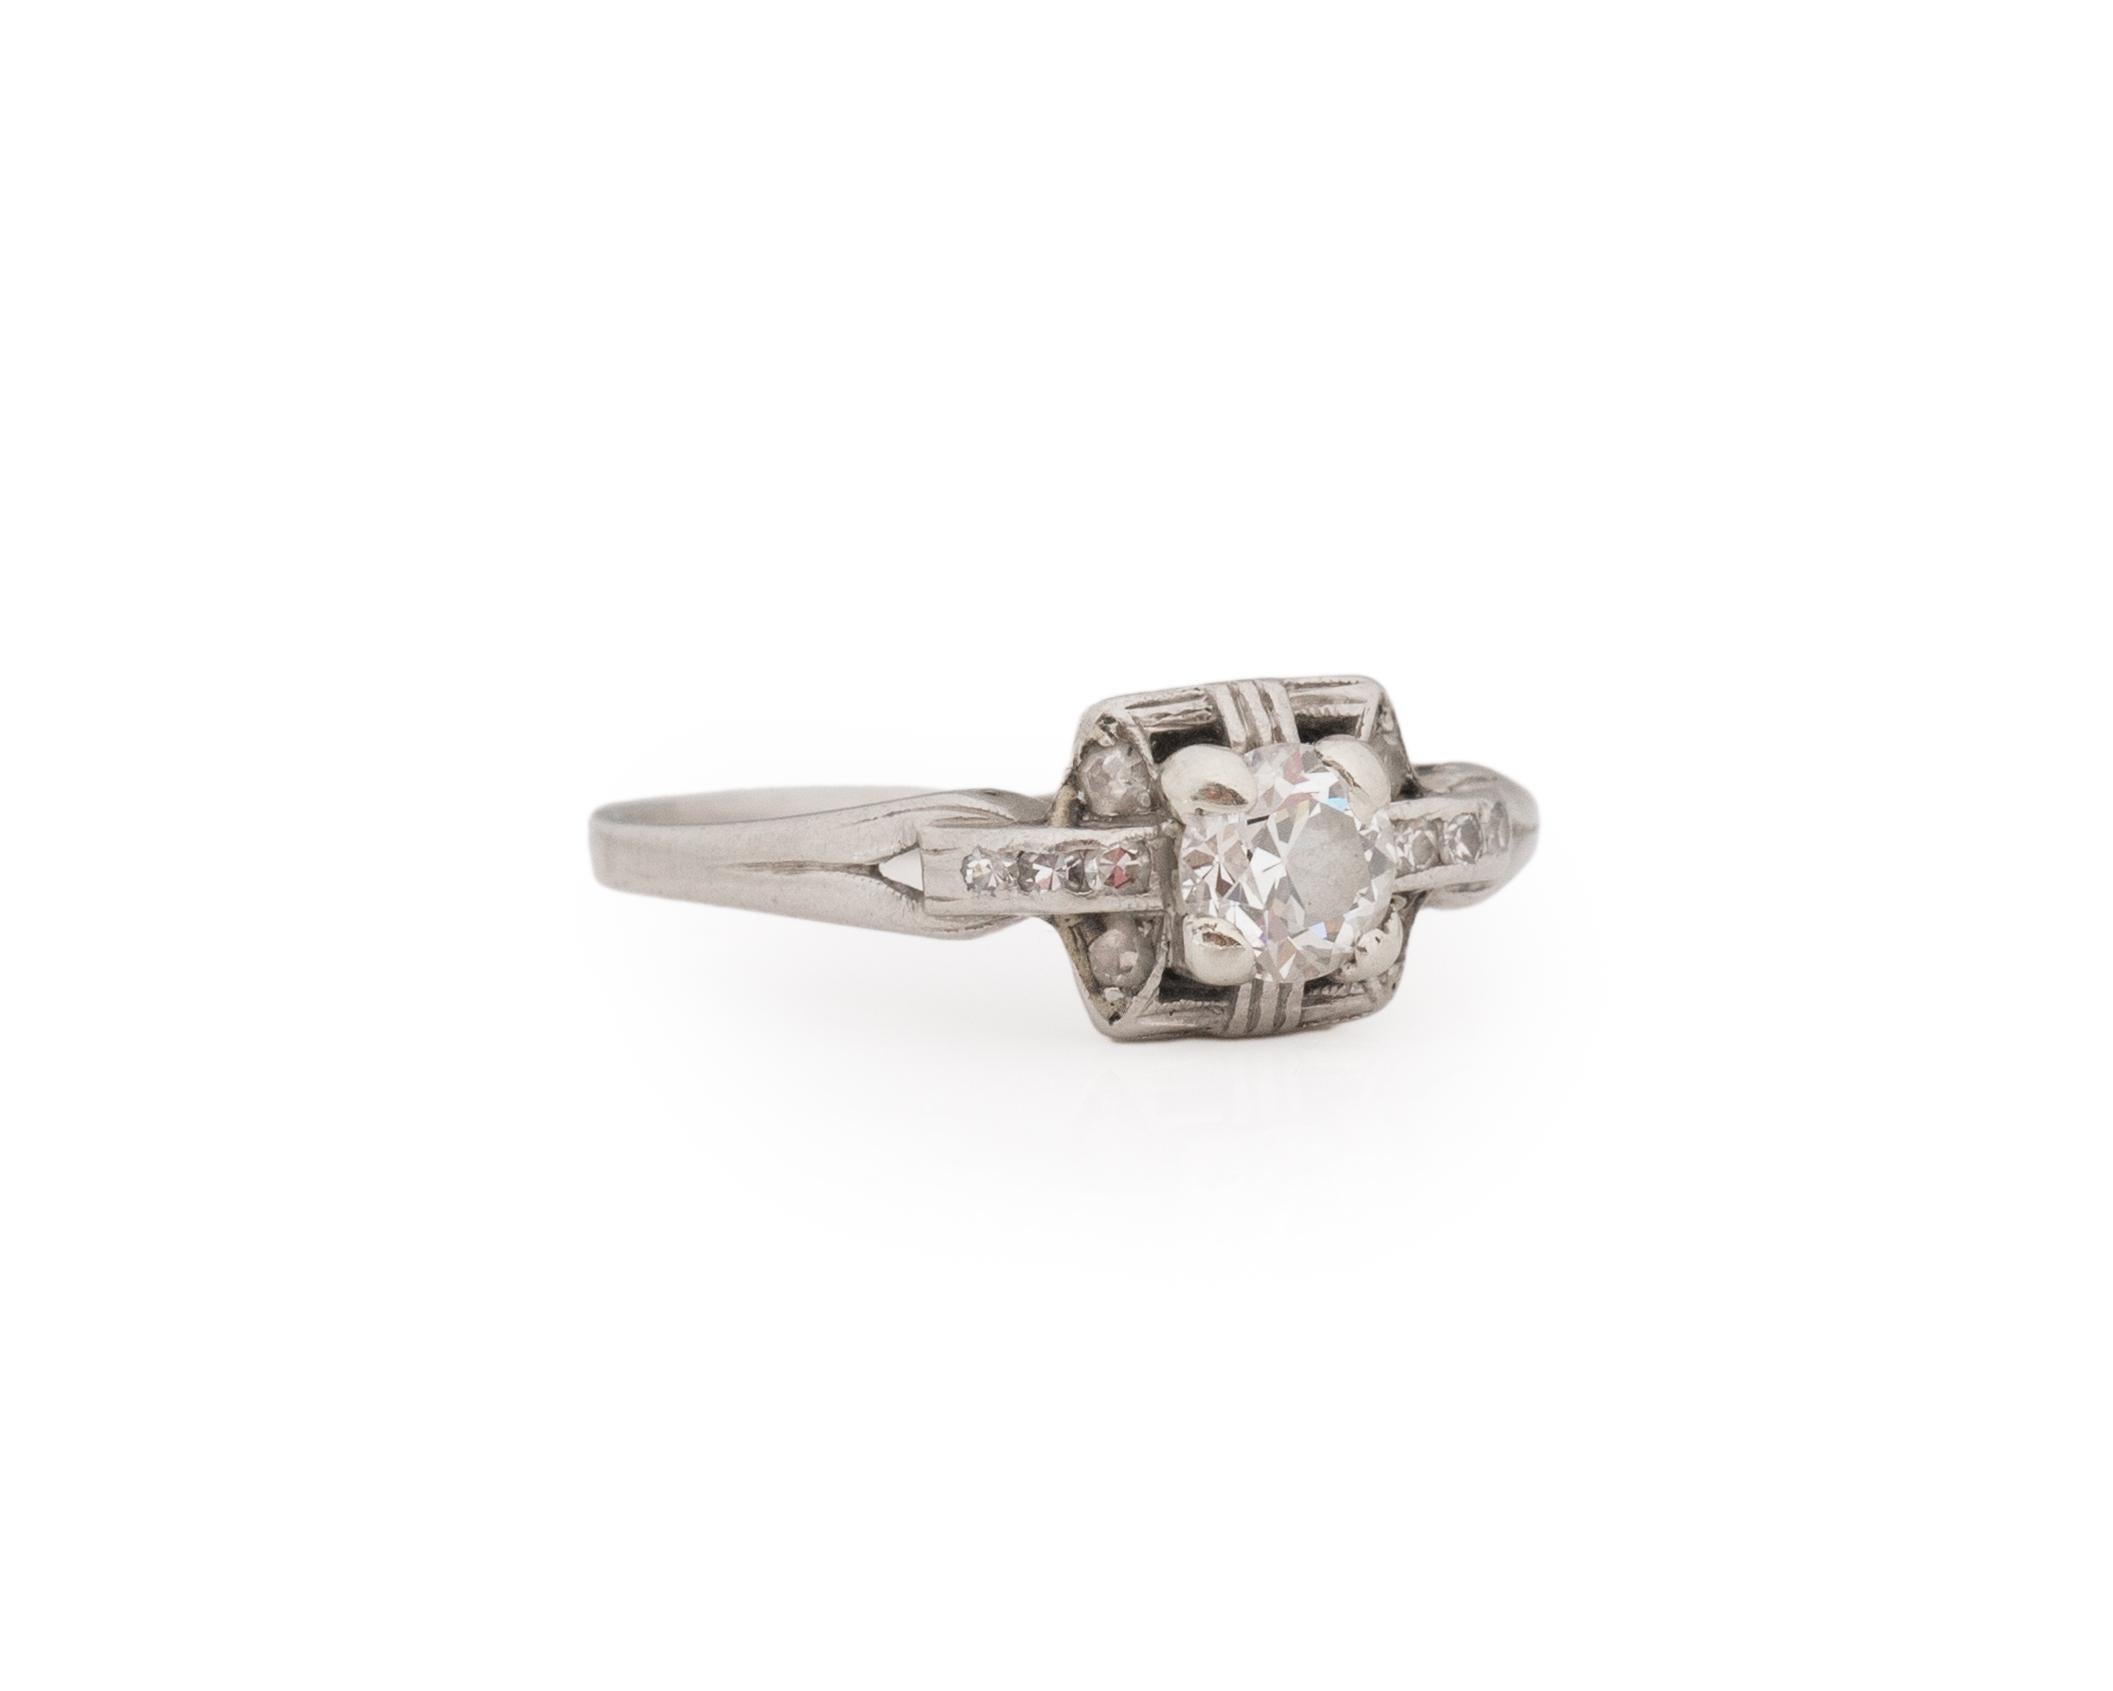 Ring Size: 6.25
Metal Type: Platinum [Hallmarked, and Tested]
Weight: 2.65 grams

Center Diamond Details:
Weight: .30ct
Cut: Old European brilliant
Color: F
Clarity: VS

Finger to Top of Stone Measurement: 4mm
Condition: Excellent